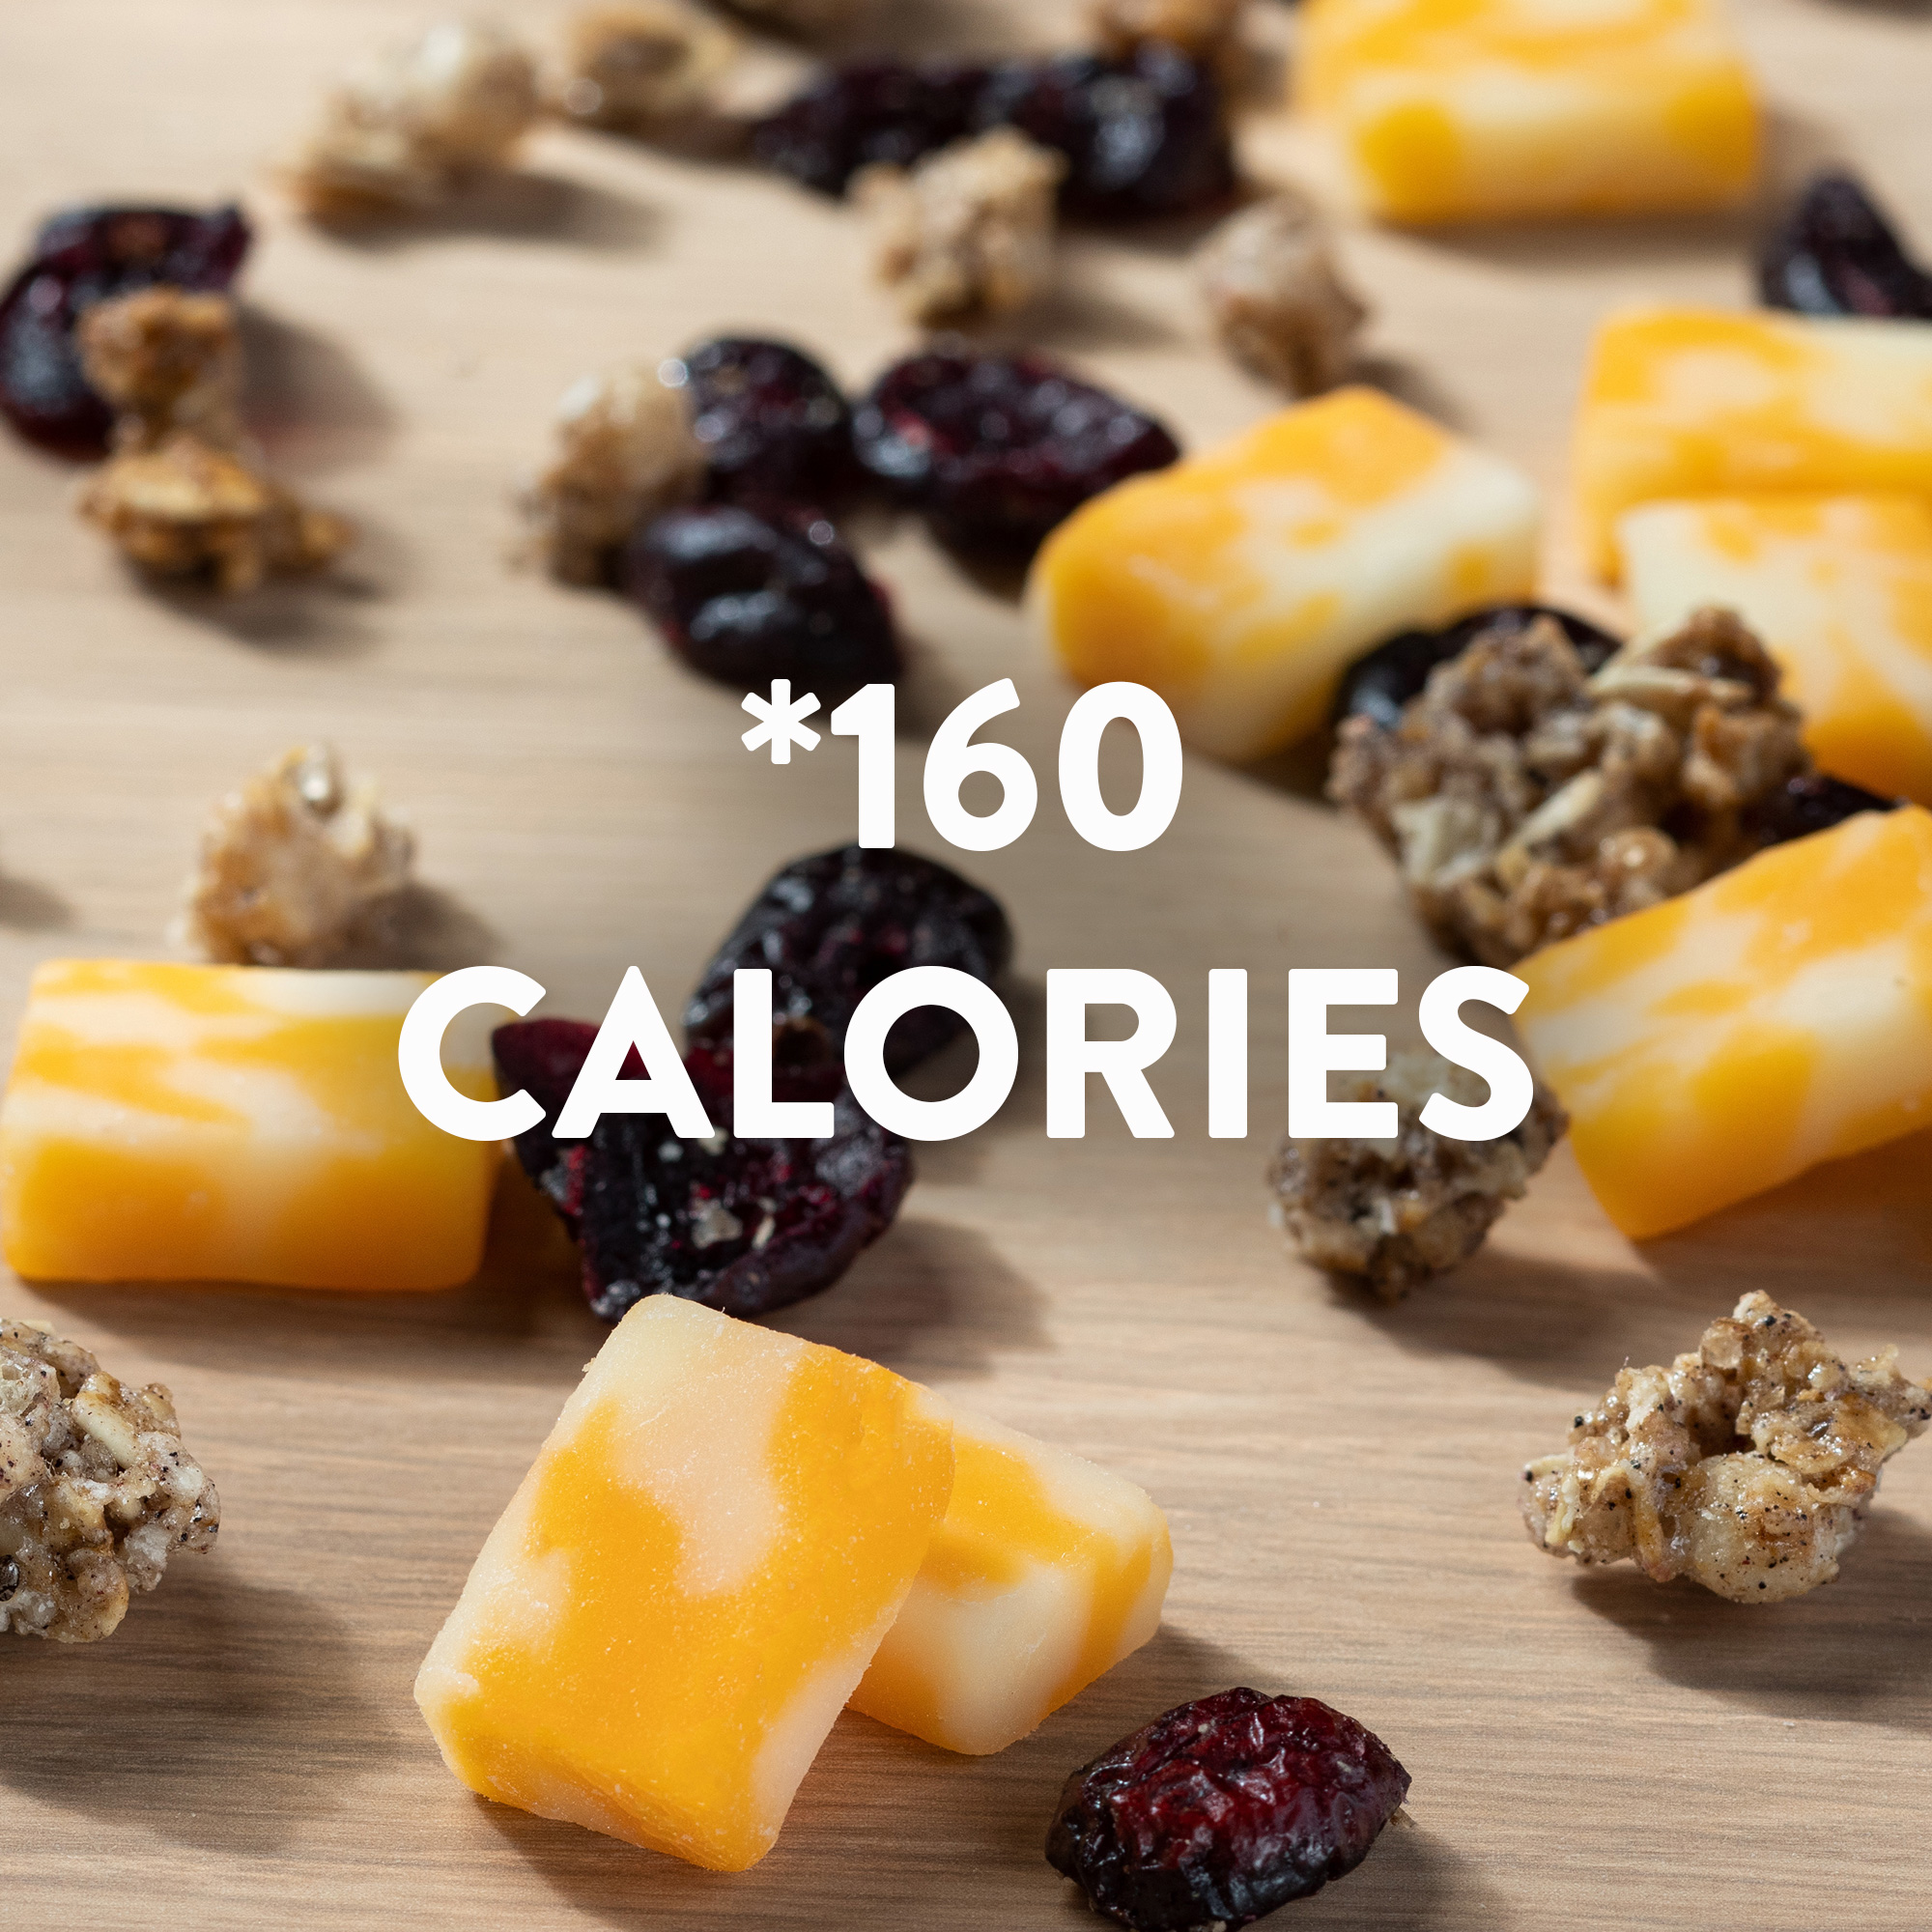 Sargento®  Sunrise Balanced Breaks® Natural Double Cheddar Cheese, Vanilla Blueberry Quinoa Clusters with Other Natural Flavors, and Blueberry Juice-Infused Cranberries